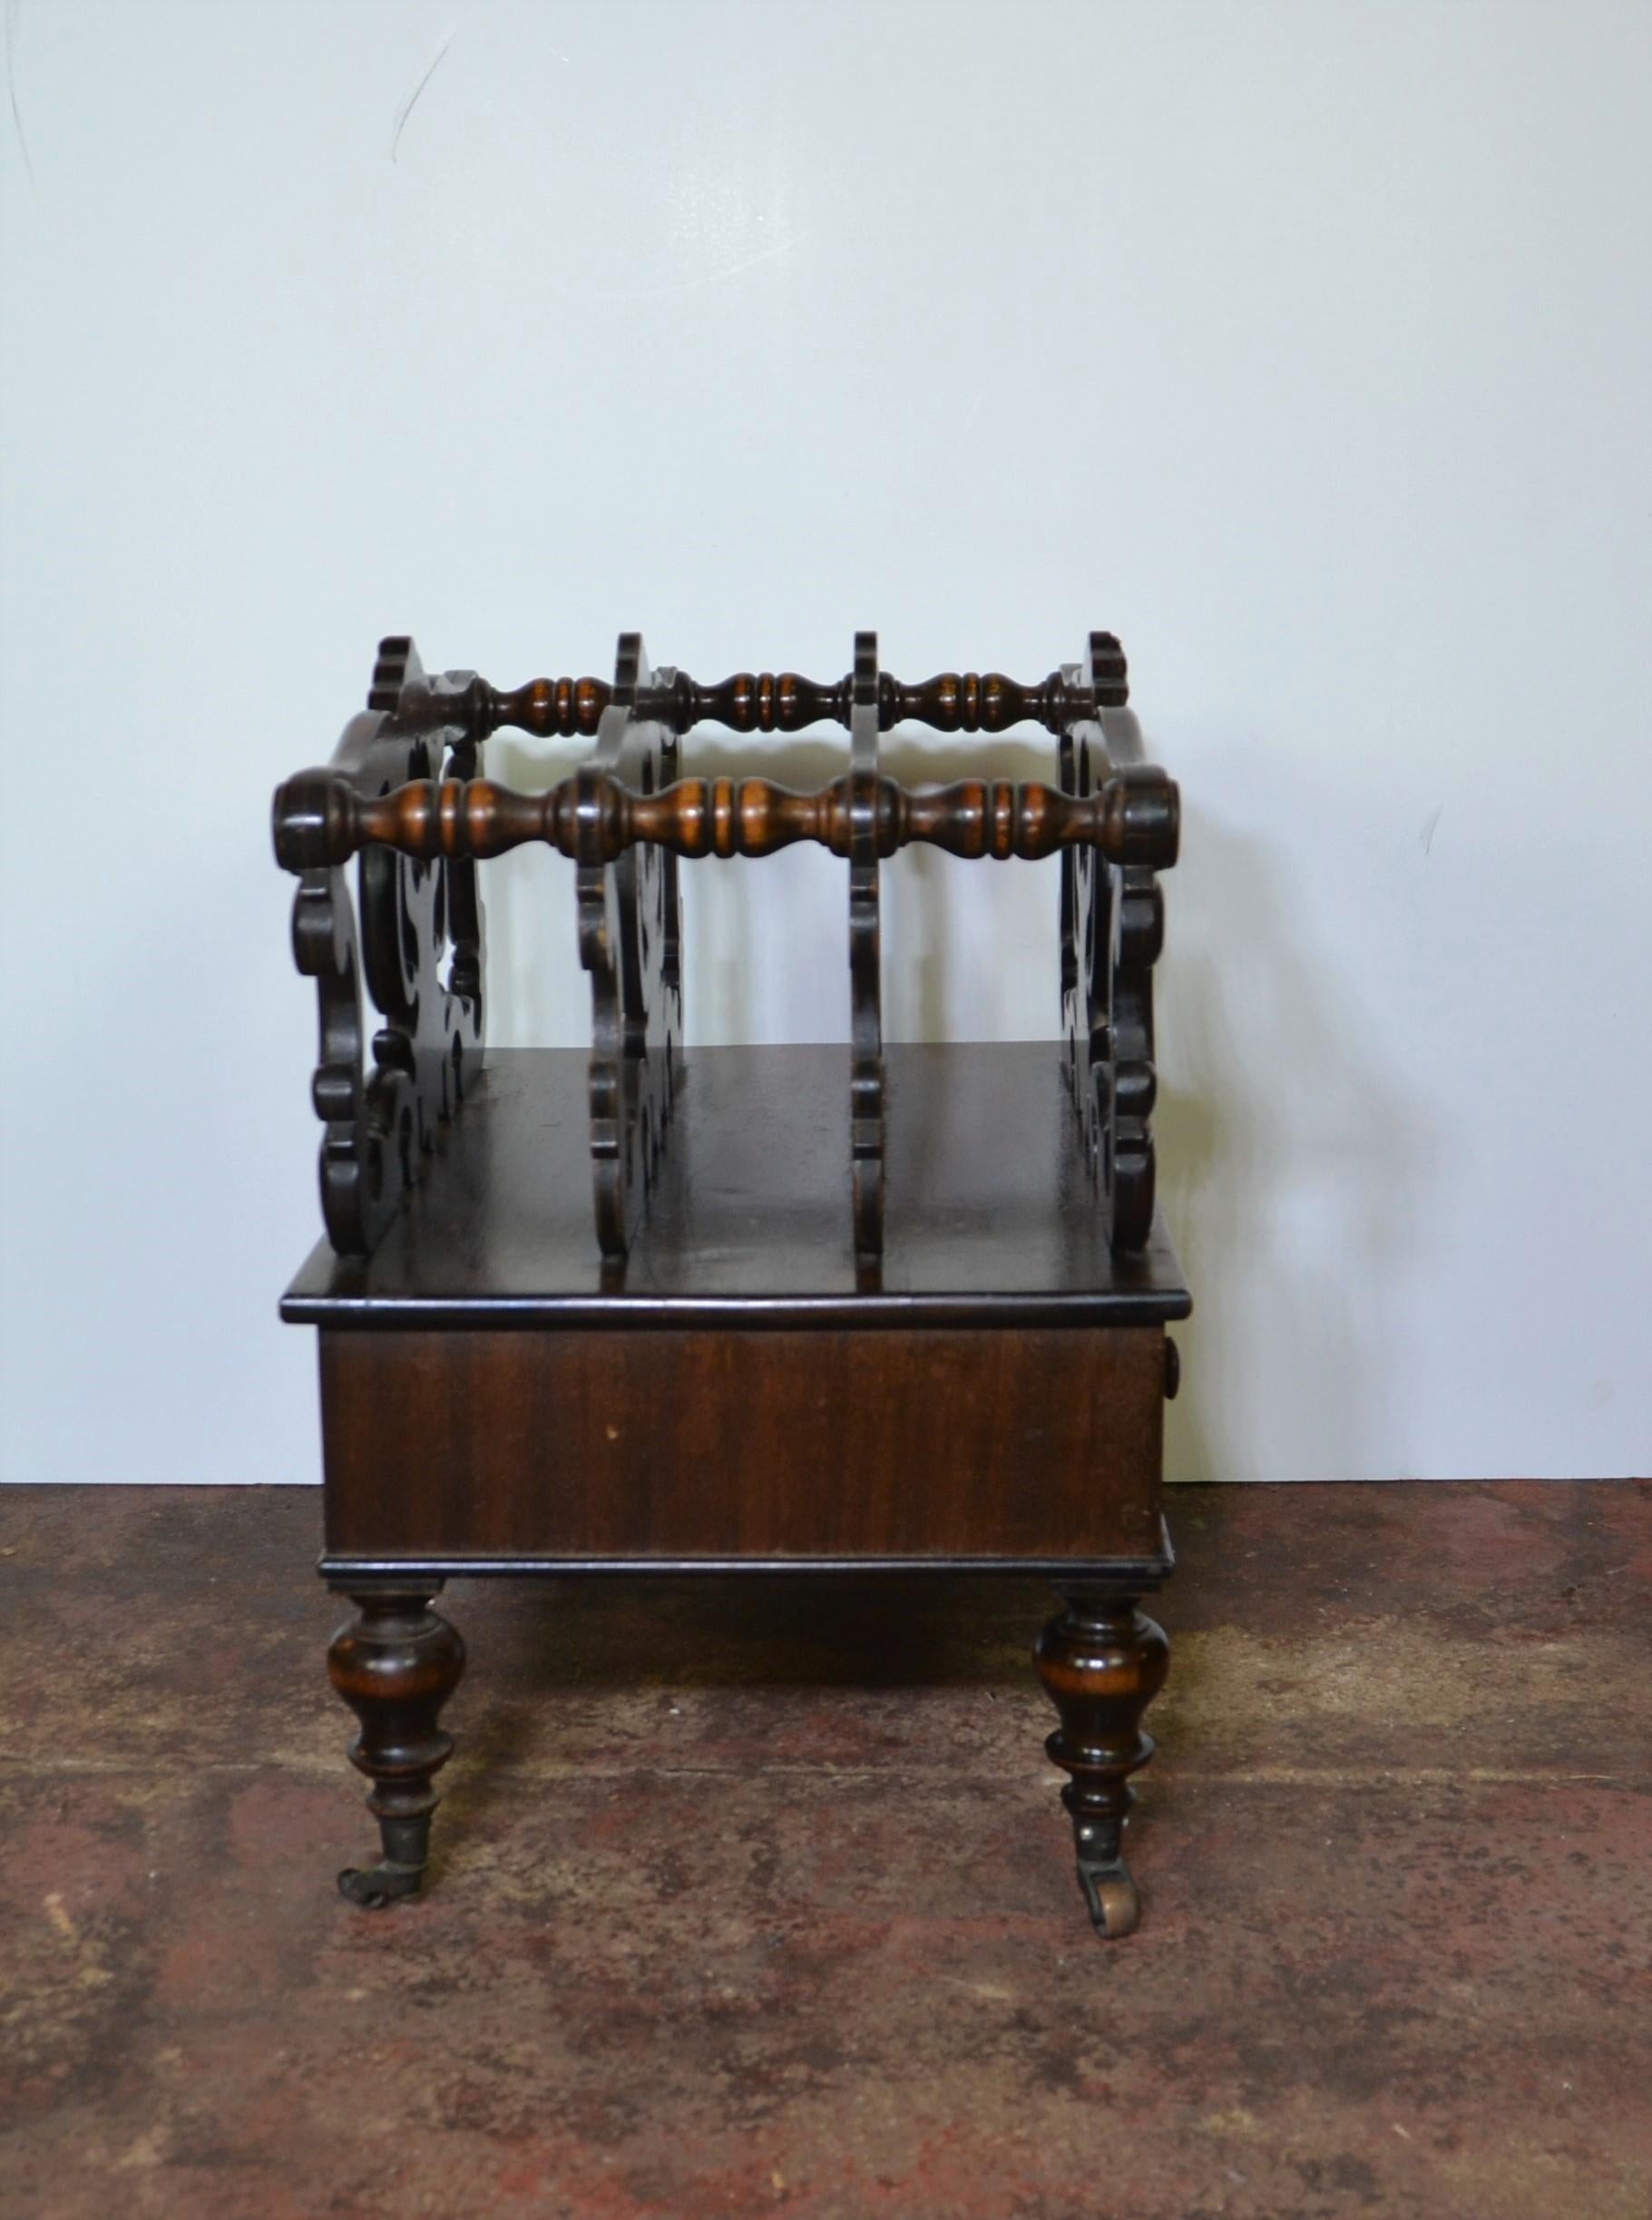 A good quality canterbury (sheet music stand) in mahogany with 3 compartments and a drawer. Good Rococo carving. Bulbous legs. Drawer liner also in hardwood mahogany. Commonly used today as magazine racks.